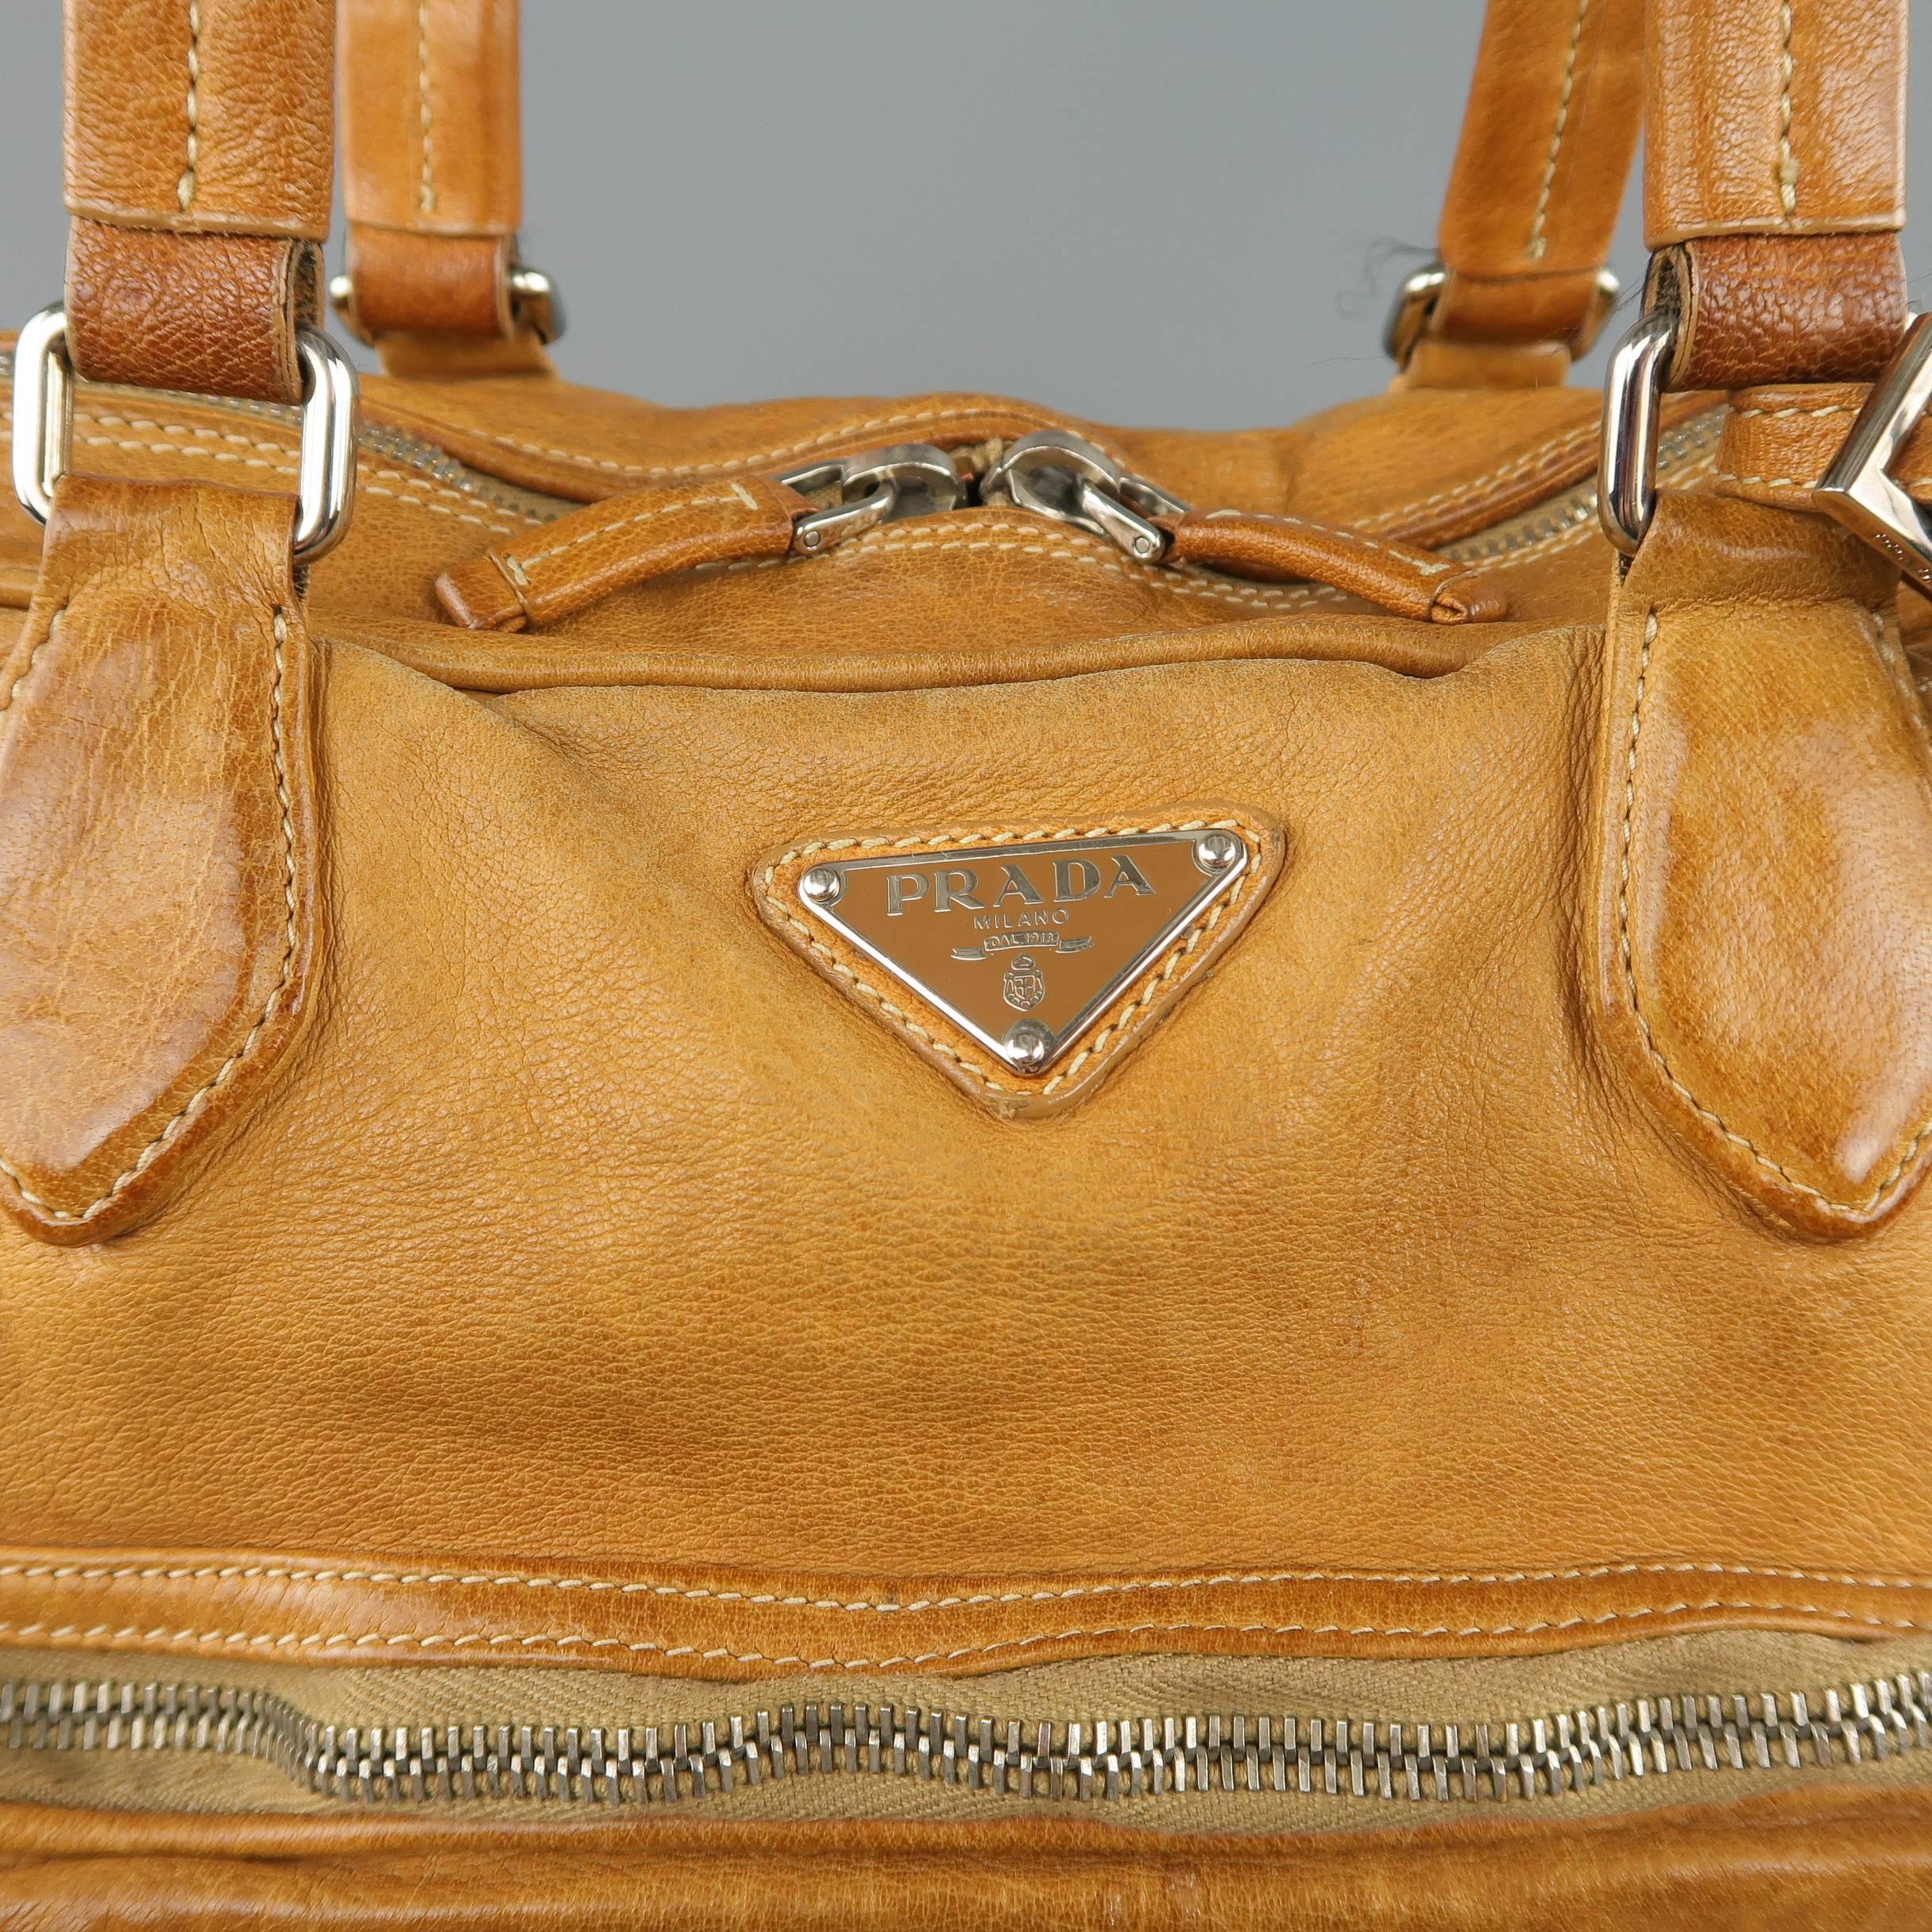 PRADA shoulder bag comes in aged tan leather with an enamel logo plaque, multiple zip patch pockets, double zip top closure, double top handles with luggage tag, and back pocket. Wear throughout leather. As-is. With dust bag. Made in Italy.
 
Fair